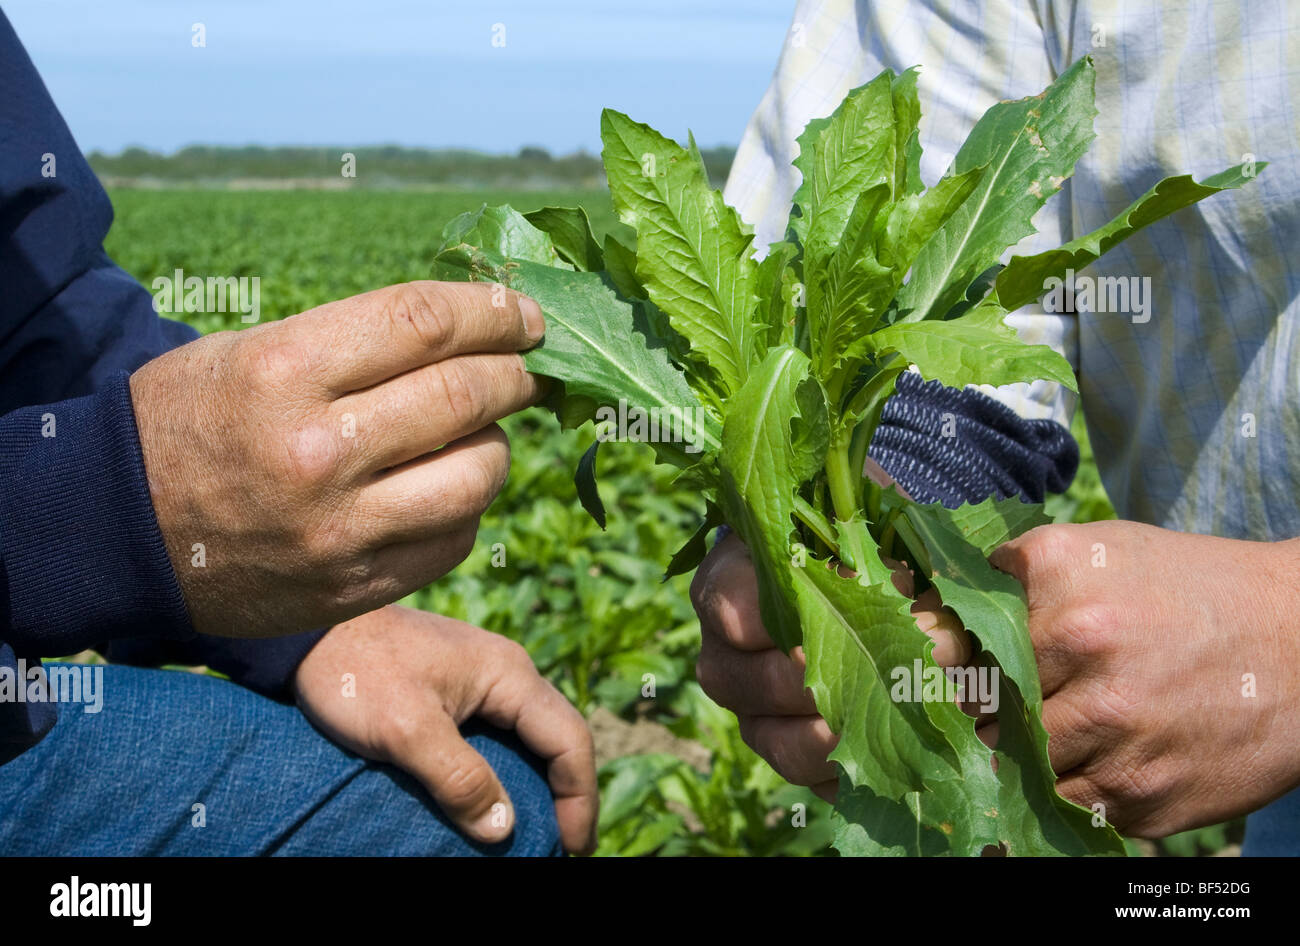 The hands of a grower & commodity broker hold an early growth safflower plant in the field while inspecting the crop /California Stock Photo